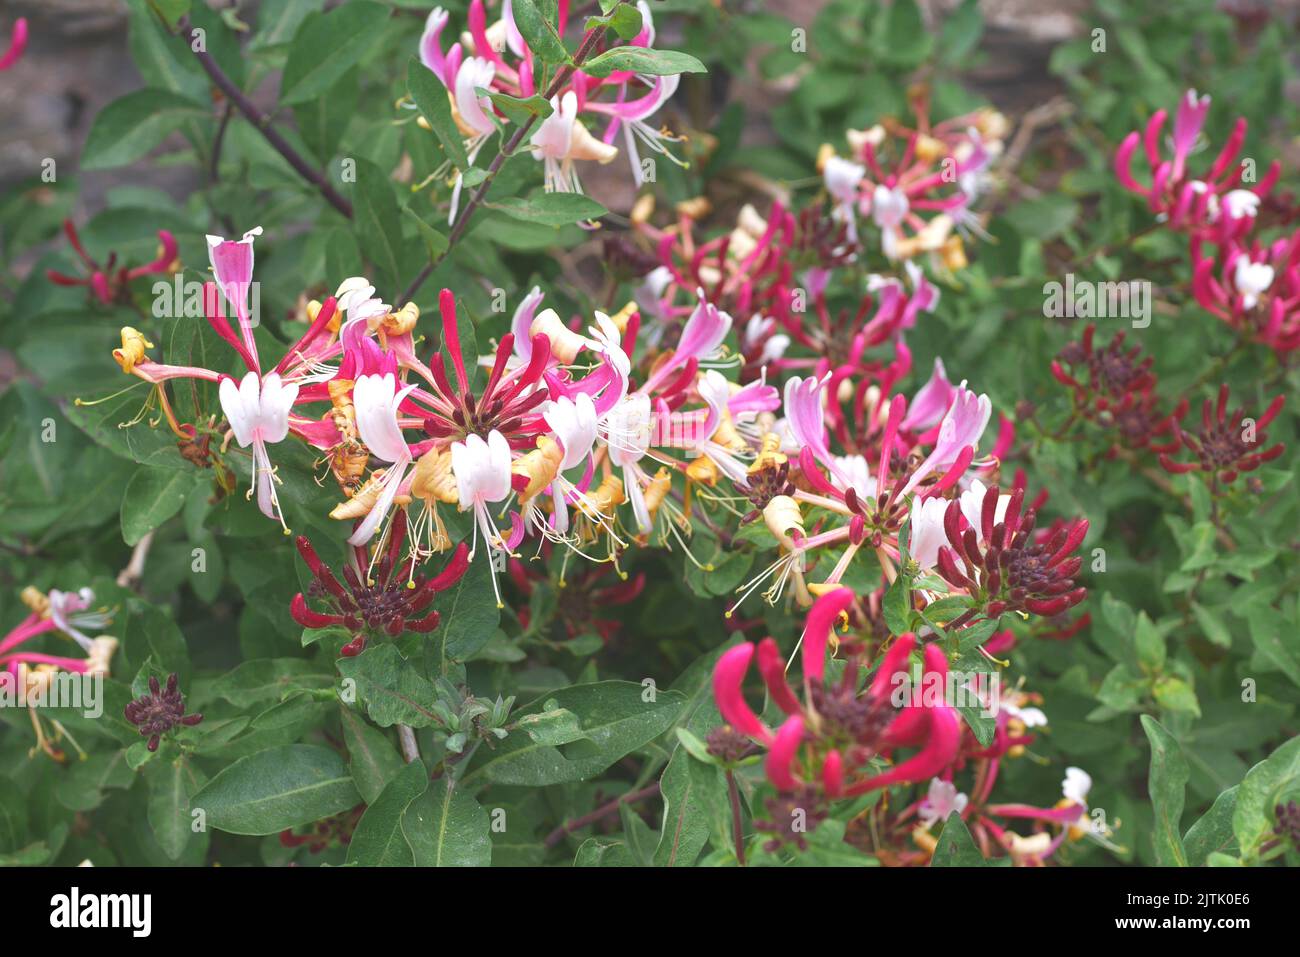 Honeysuckle, Lonicera, growing in a garden, Herefordshire, England Stock Photo